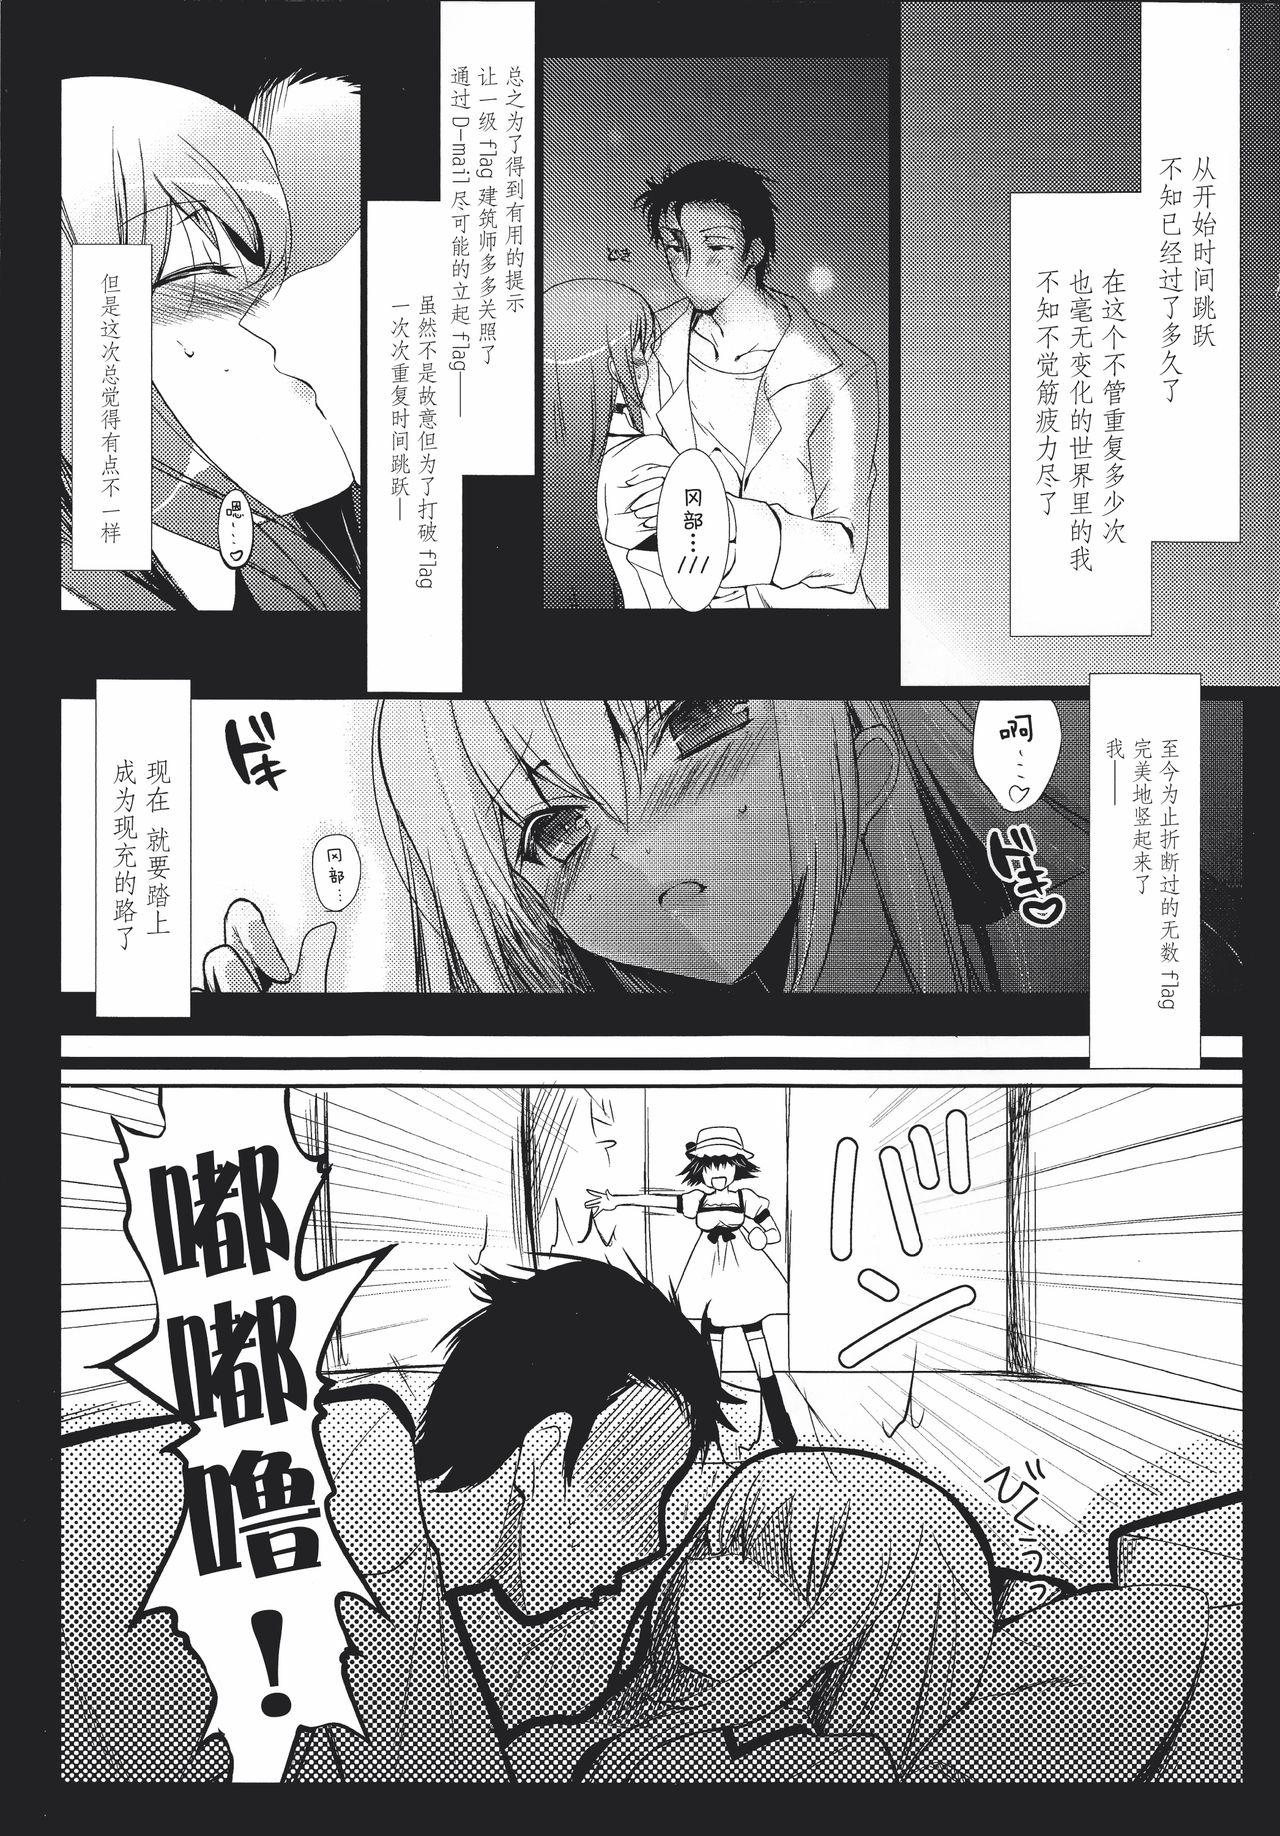 Her Ore no Joshu to, Ore no Yome. - Steinsgate Classic - Page 4